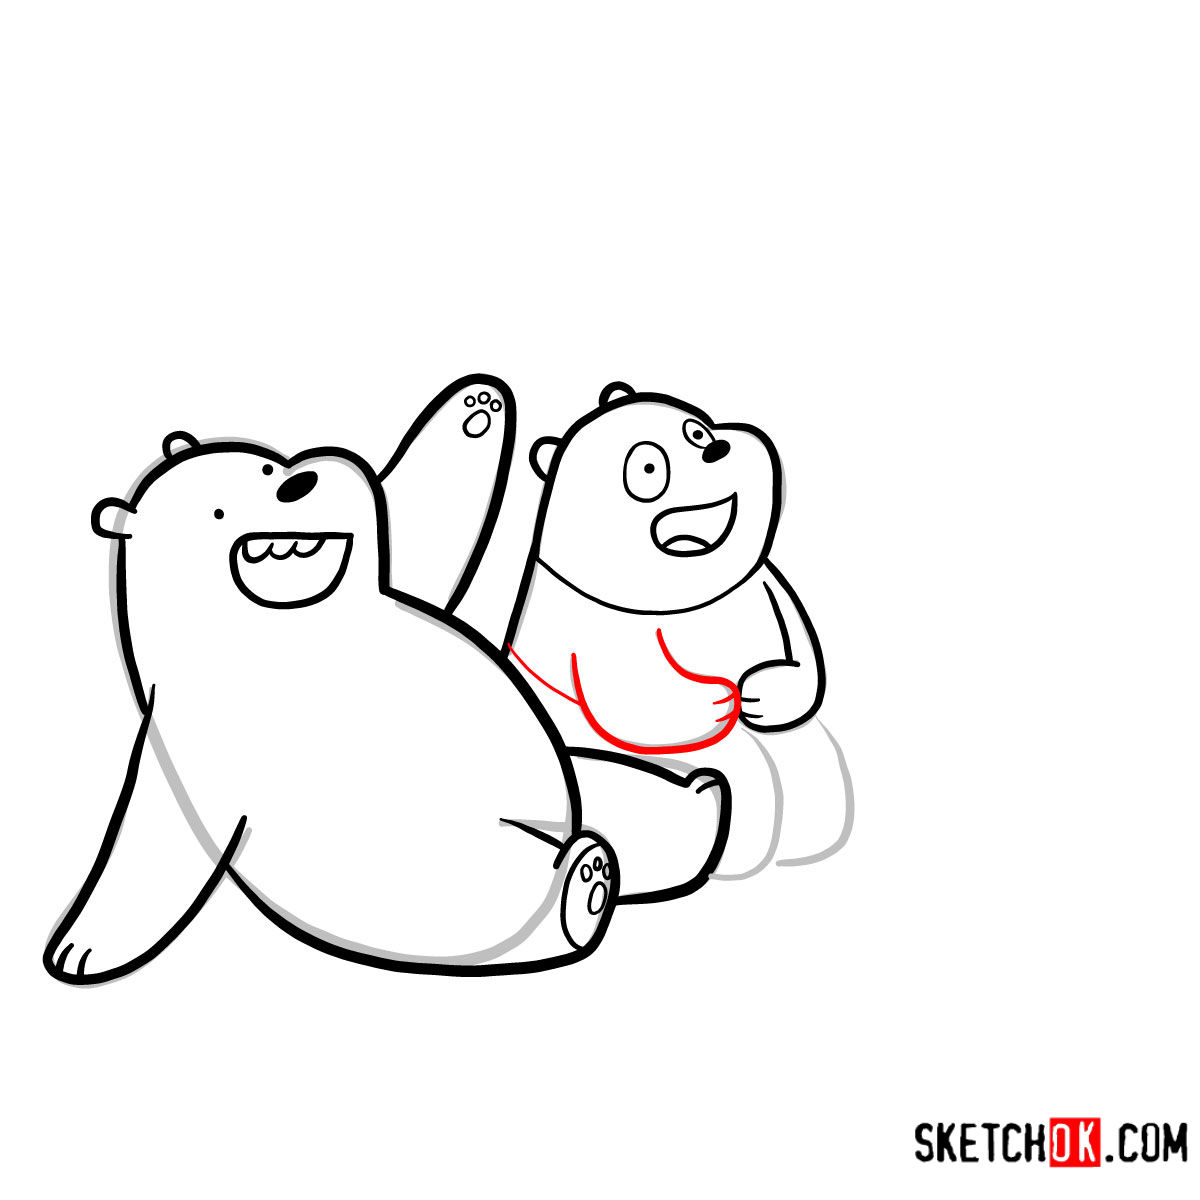 How to draw all three bears together | We Bare Bears - step 12